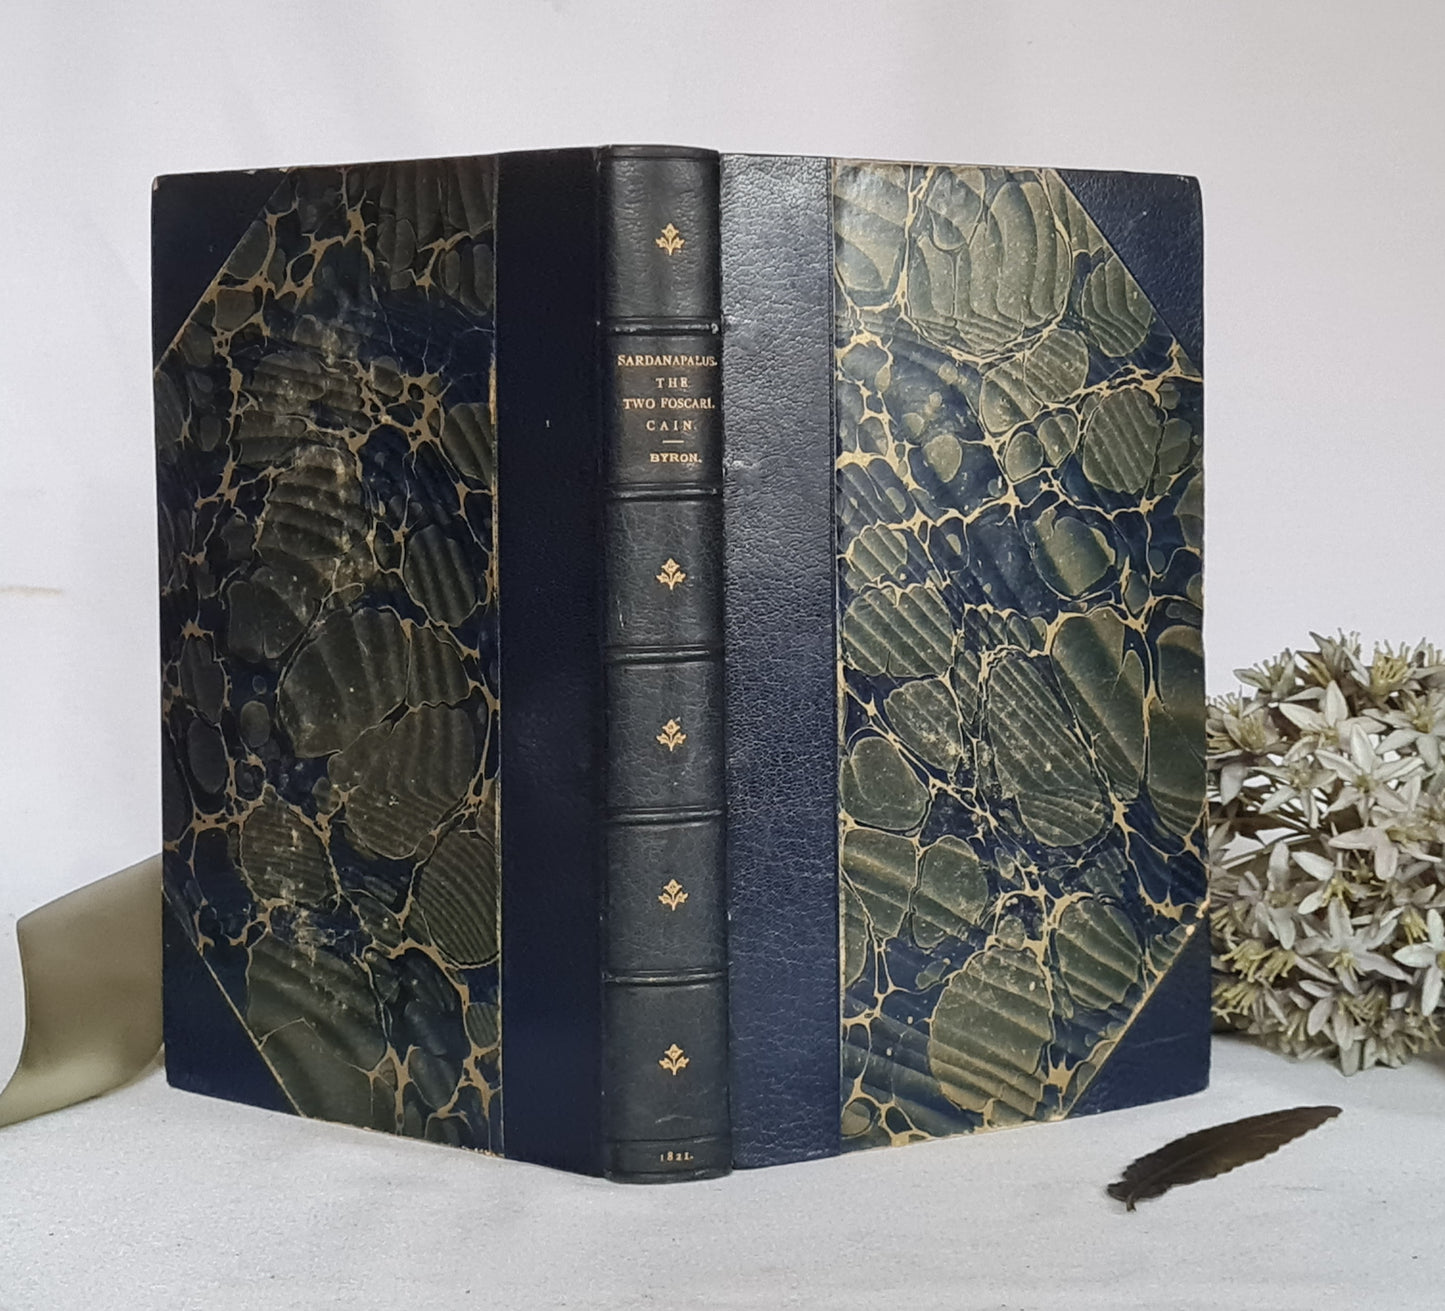 First Edition 1821 Lord Byron's Sardanapalus, A Tragedy; The Two Foscari, A Tragedy and Cain, A Mystery / John Murray, London / Fine Binding